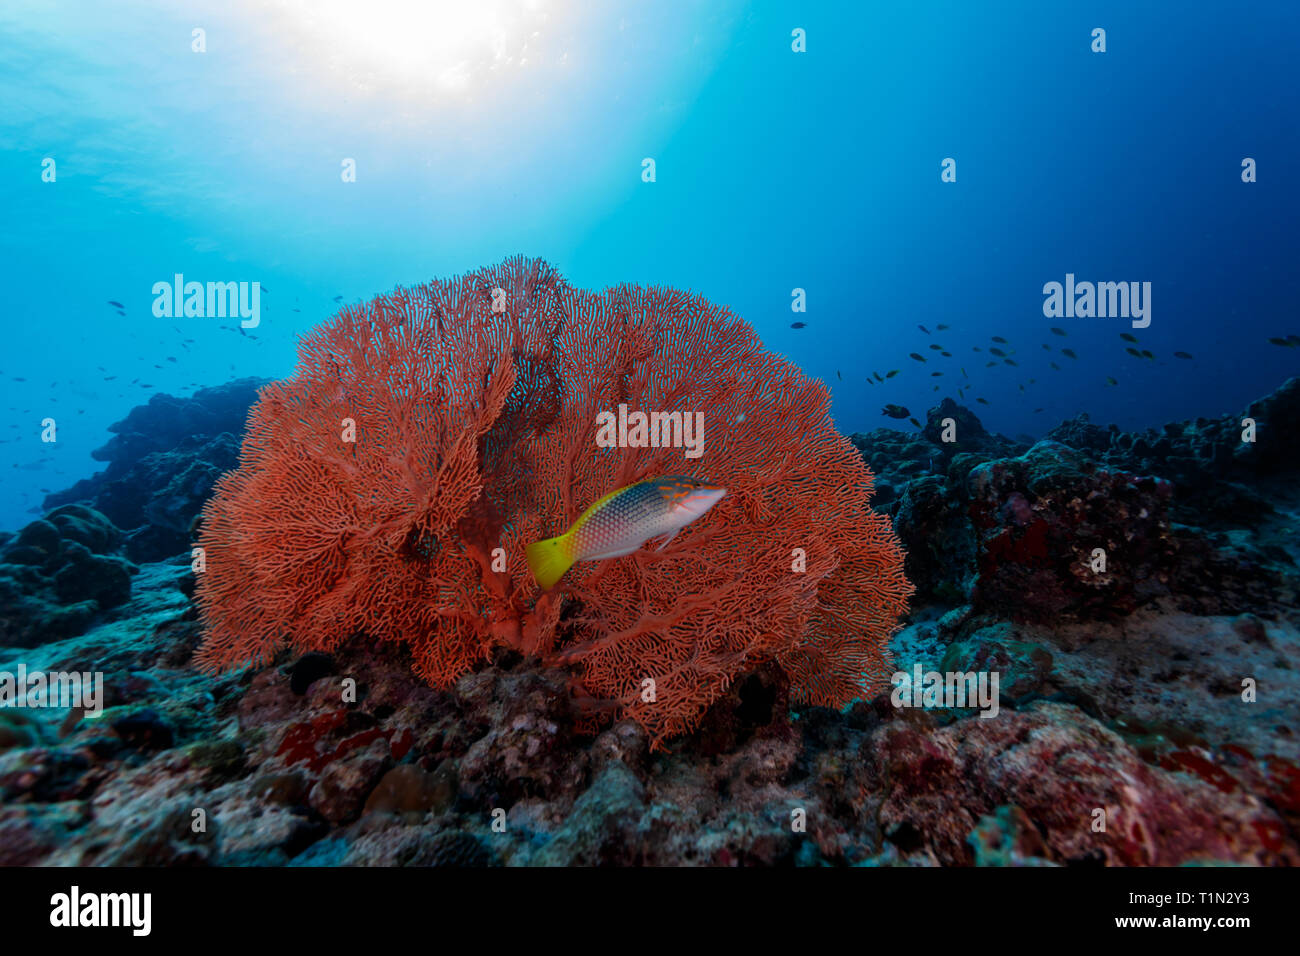 Closeup of gorgeous deep orange Gorgonian sea fan and yellow tail silver red fish on reef filled with colorful varieties of sponges and corals Stock Photo